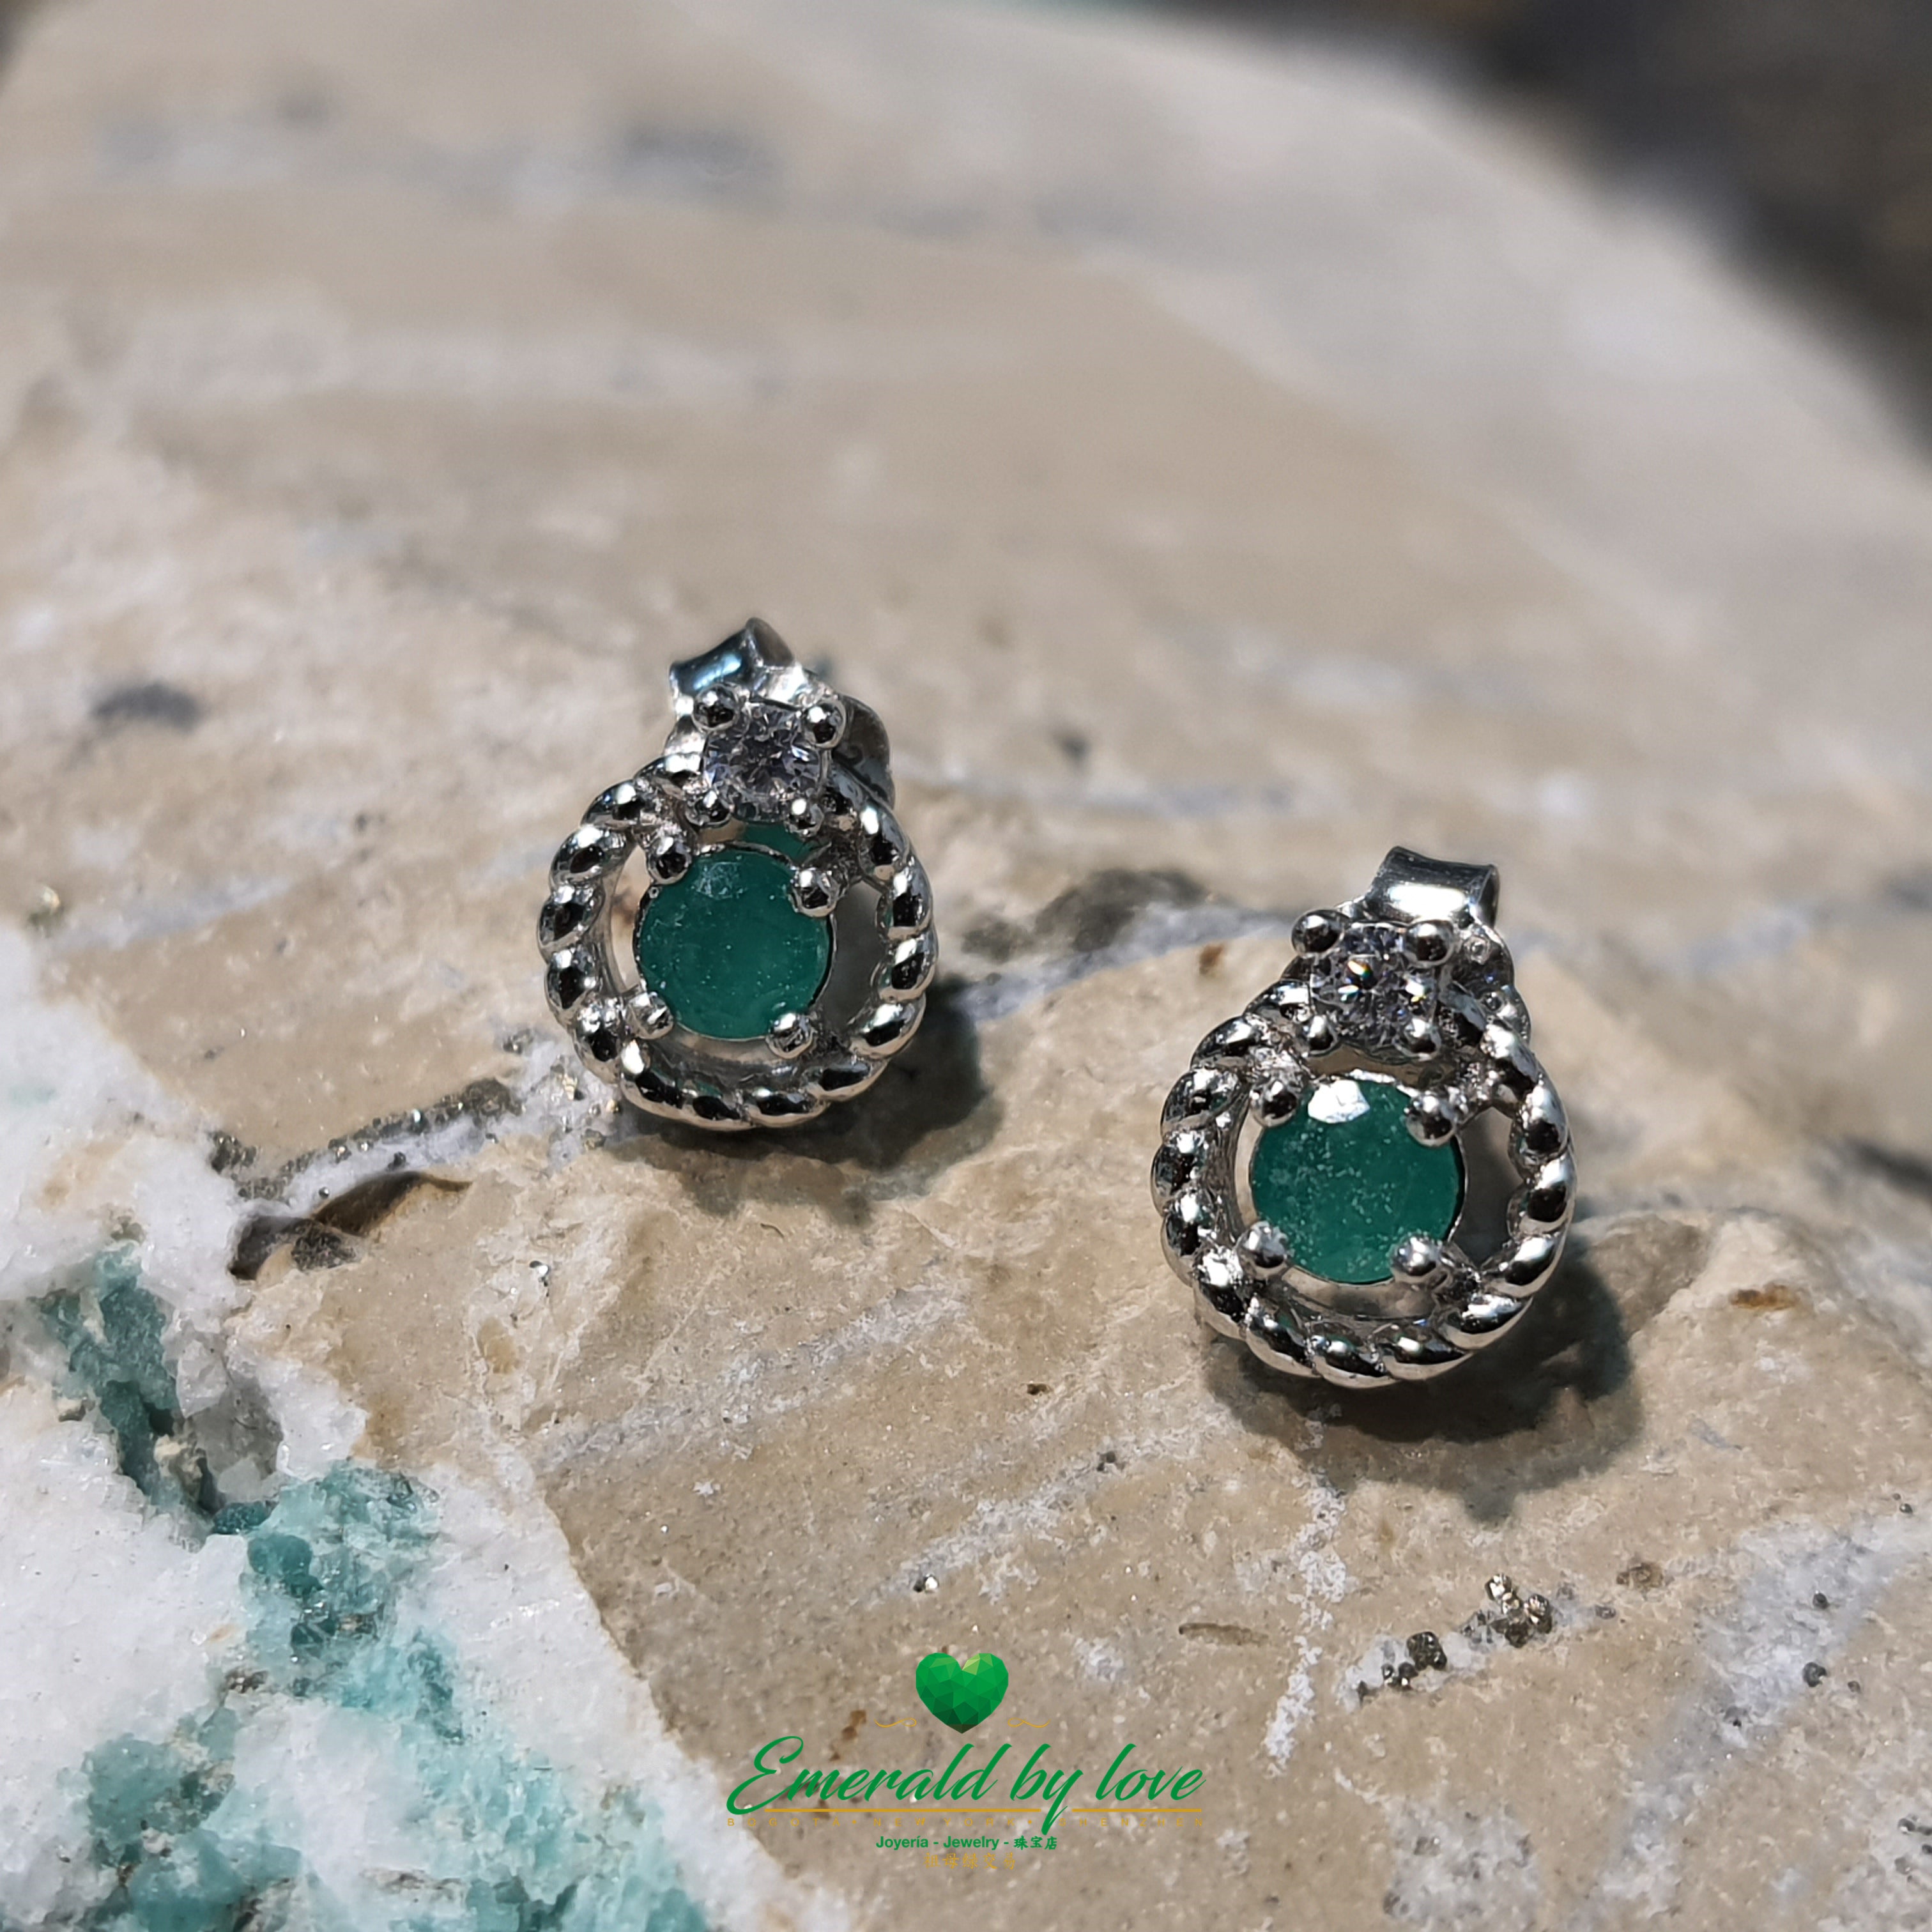 Delicate Sterling Silver Stud Earrings with Petite Round Central Colombian Emerald